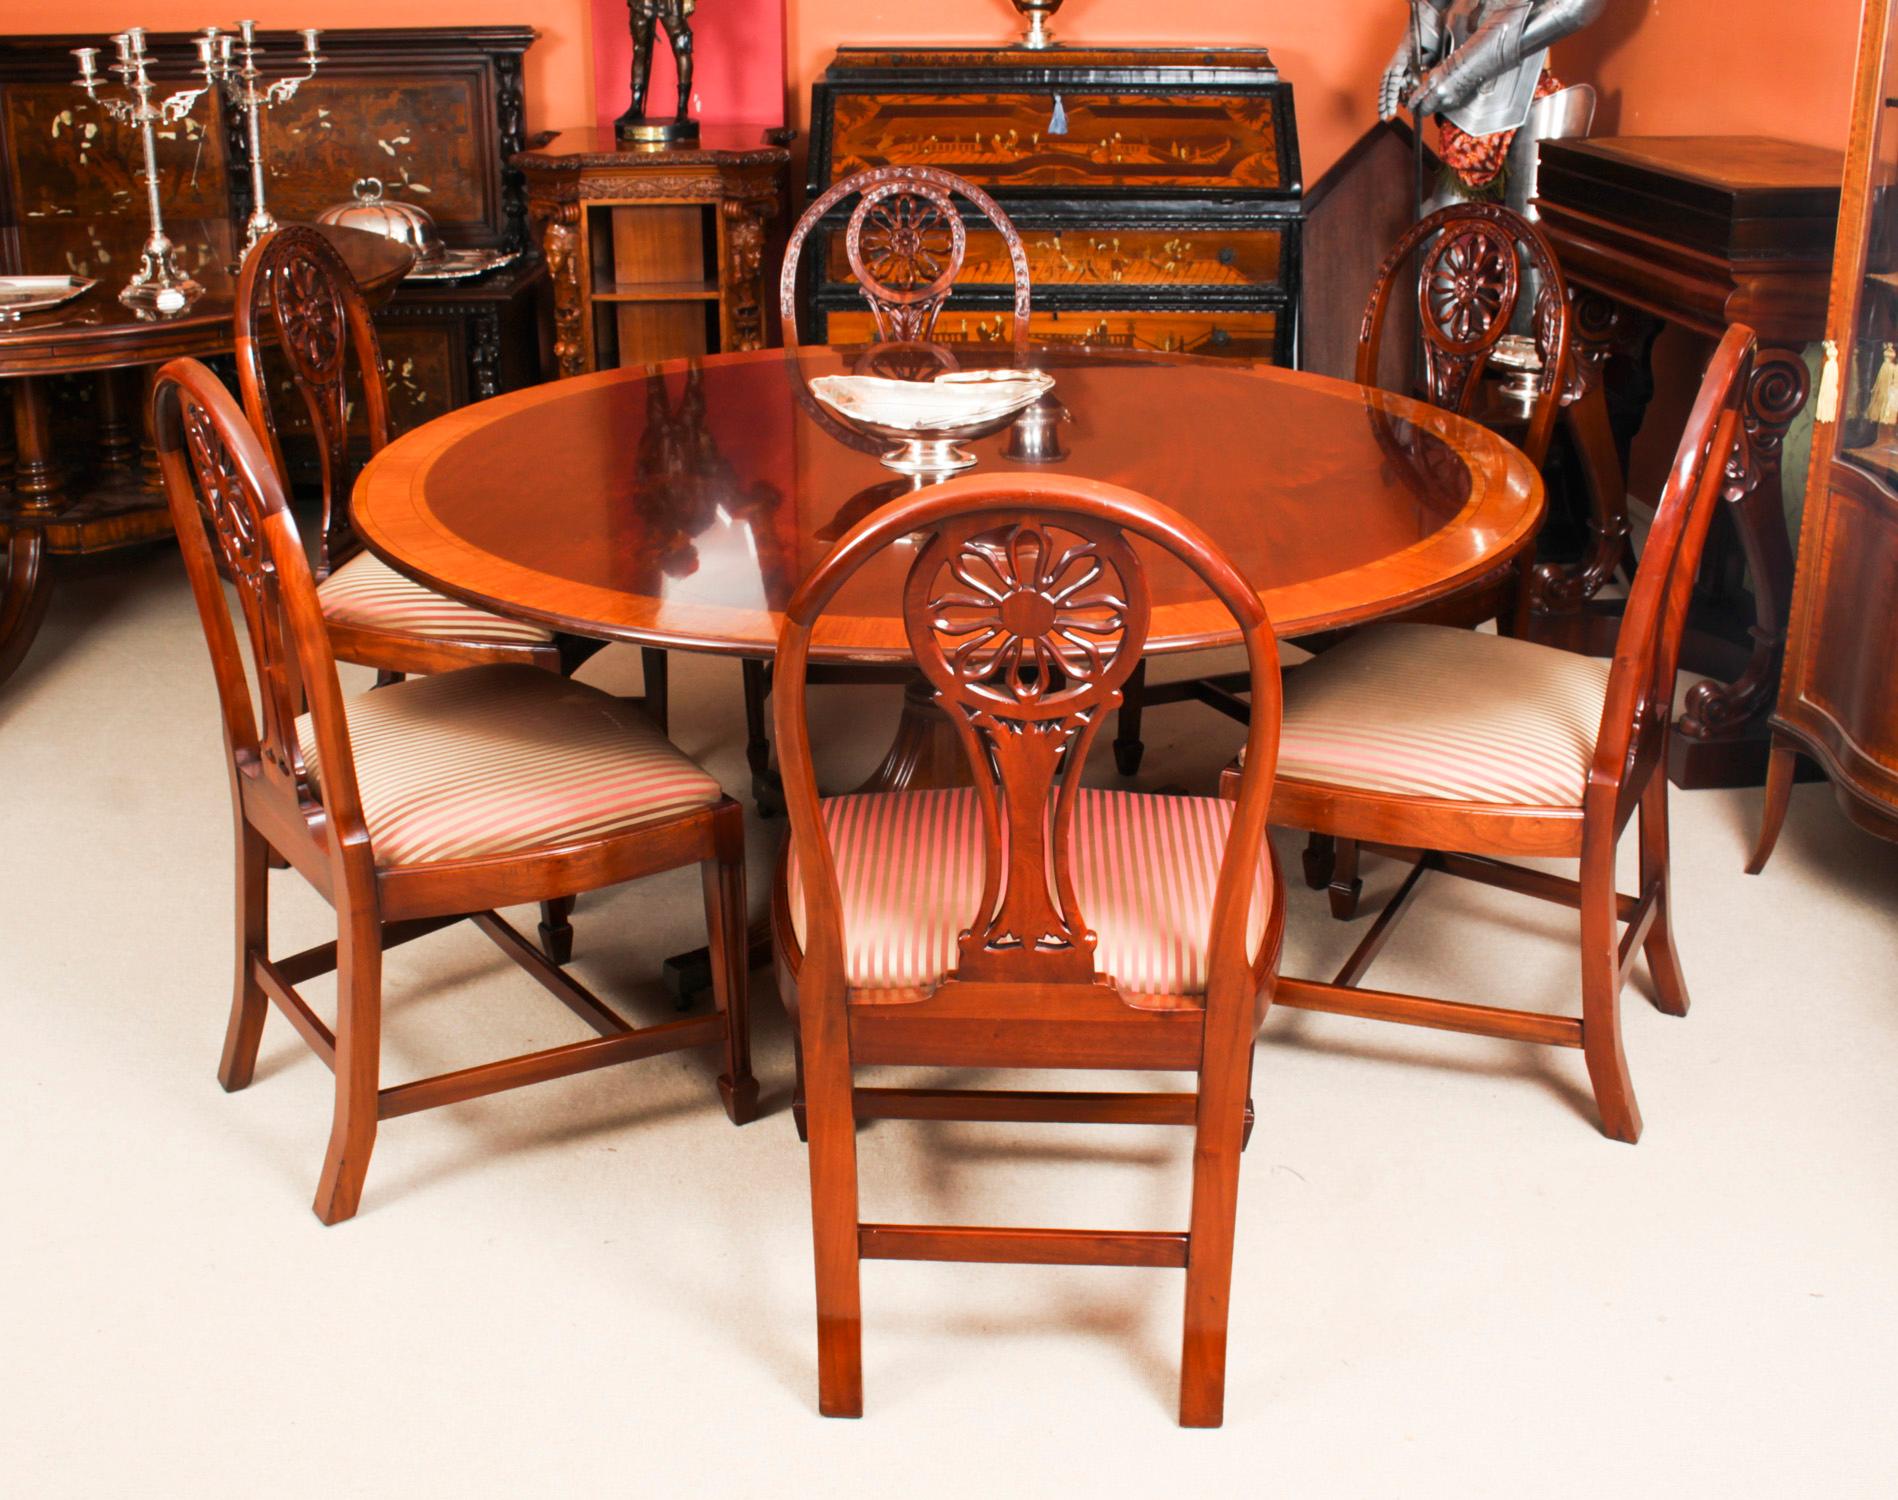 This is a beautiful Regency Revival diniung suite comprising a flame mahogany circular dining table dating from Circa 1980 and a set of six Hepplewhite Revival dining chairs.

The fabulous 5ft 3 inch diameter flame mahogany table was made by the